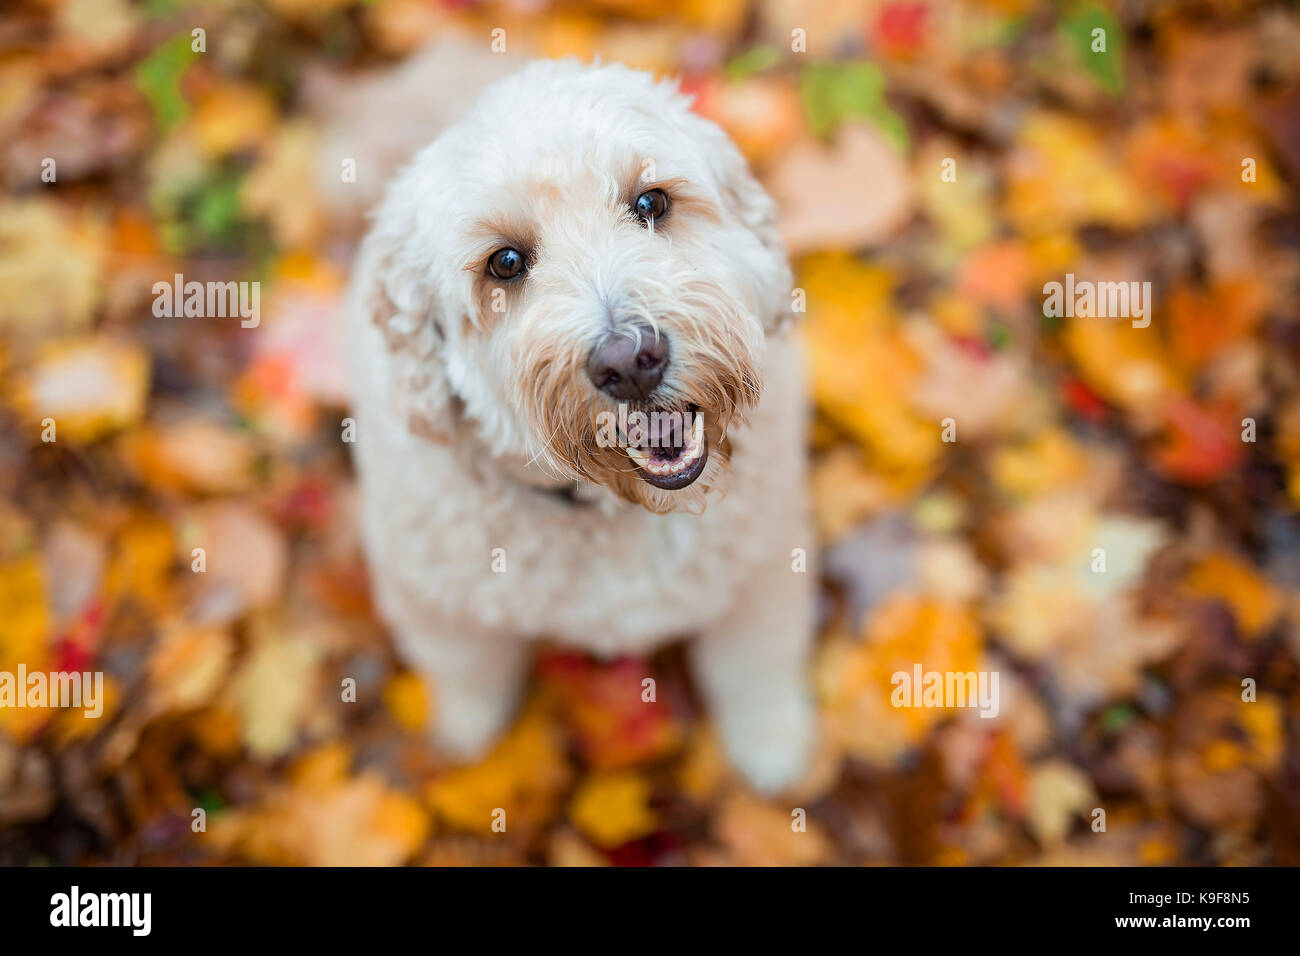 A Happy goldendoodle dog outside in autumn season Stock Photo